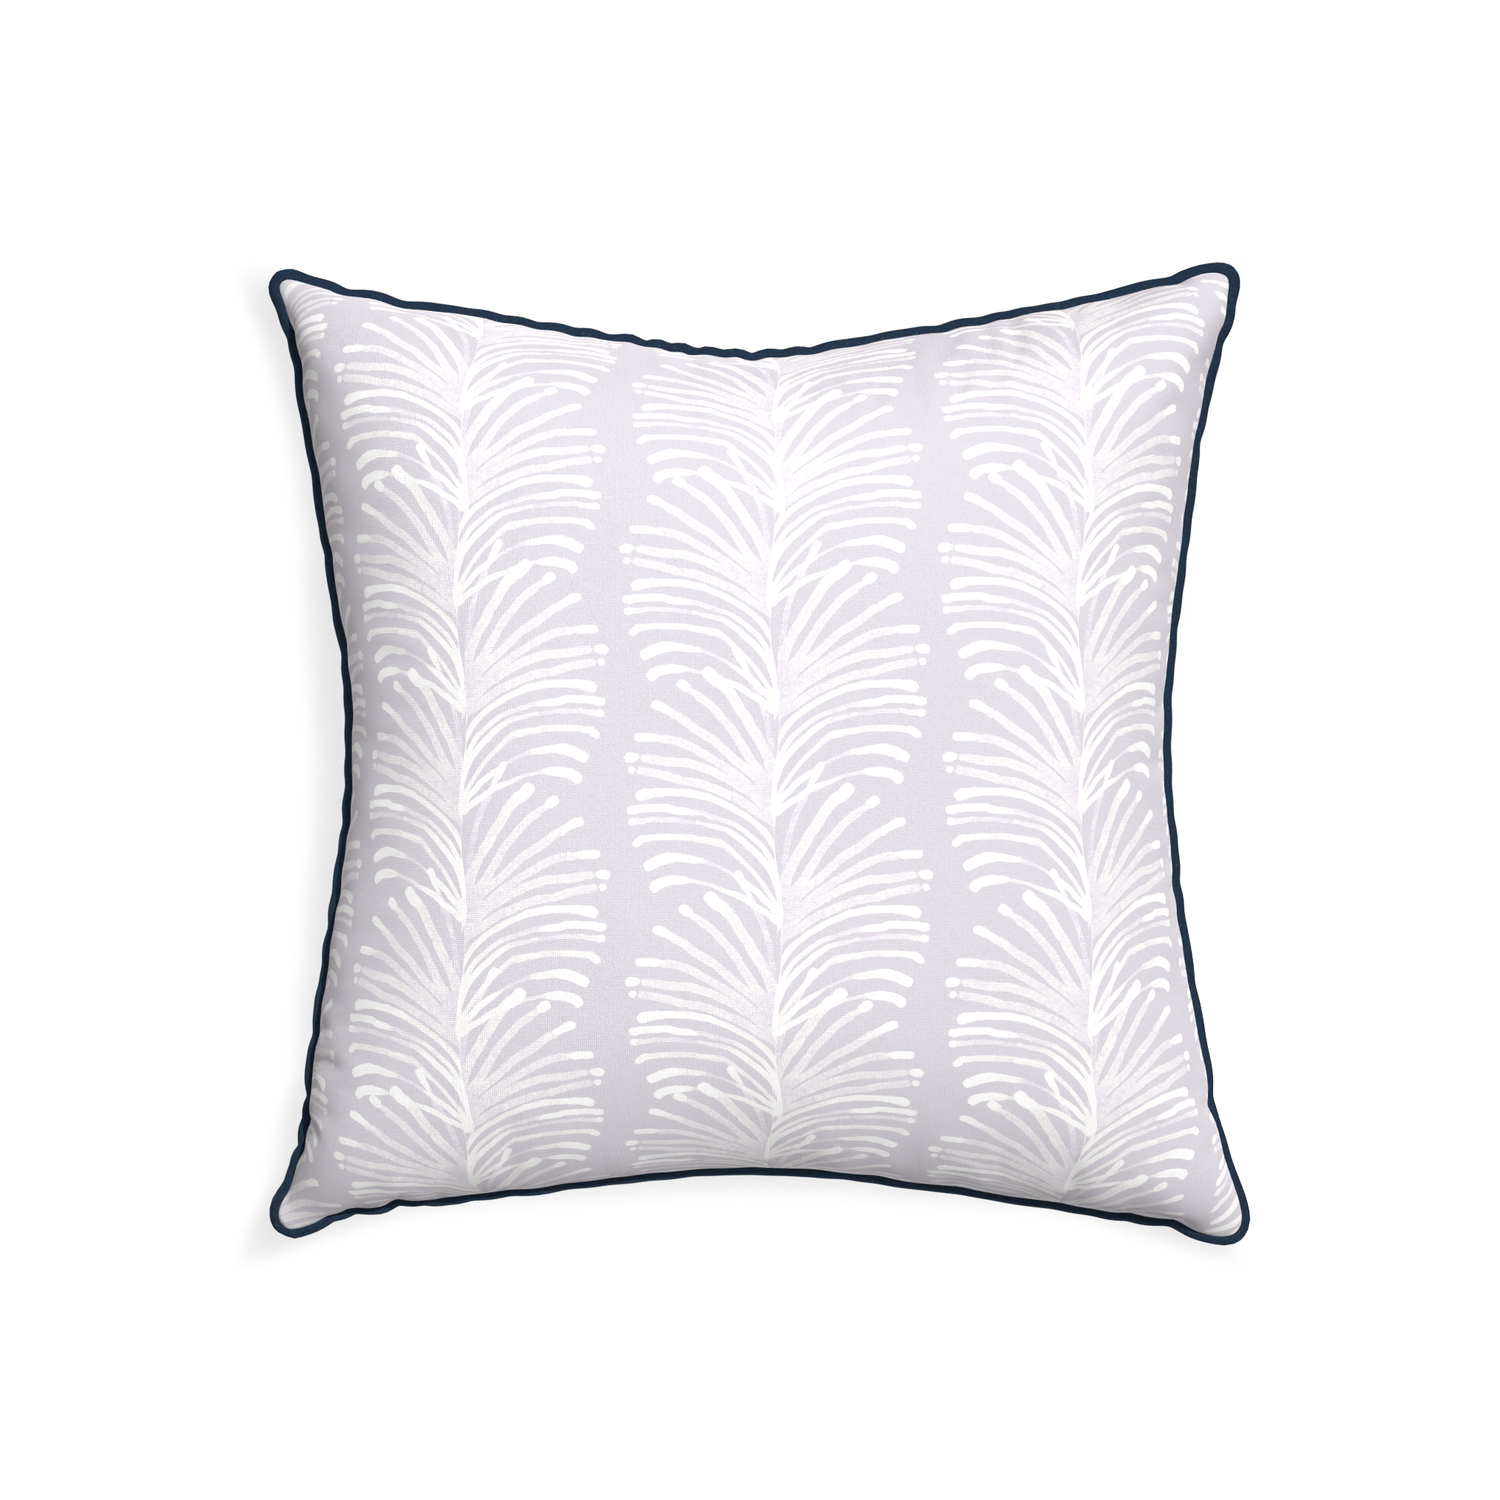 22-square emma lavender custom lavender botanical stripepillow with c piping on white background